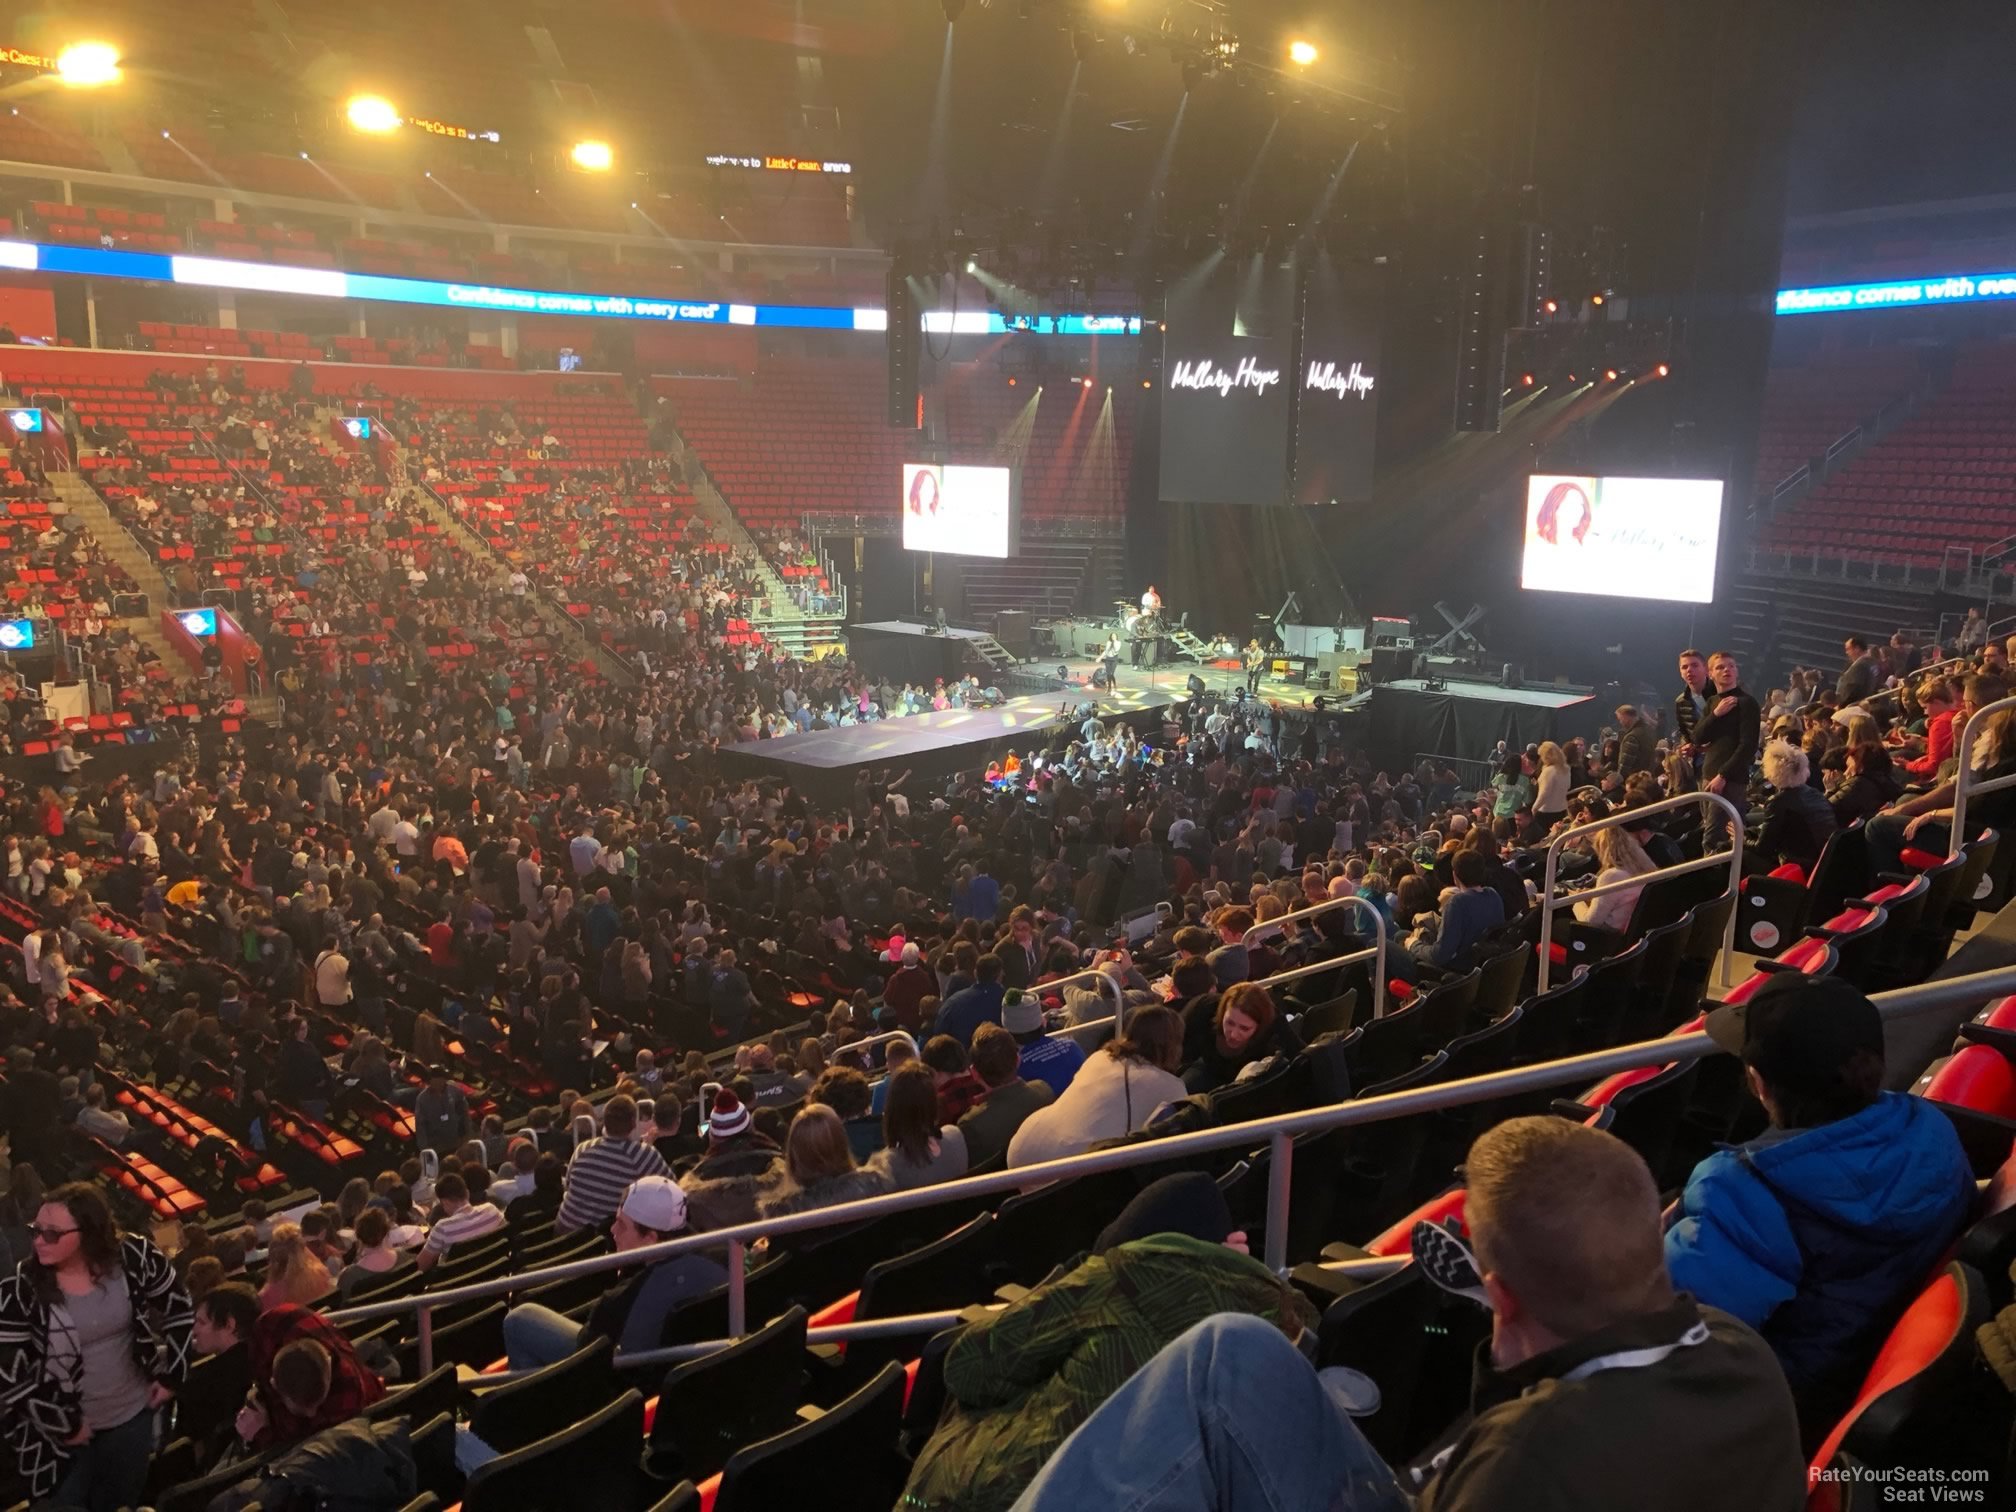 section 111, row 18 seat view  for concert - little caesars arena